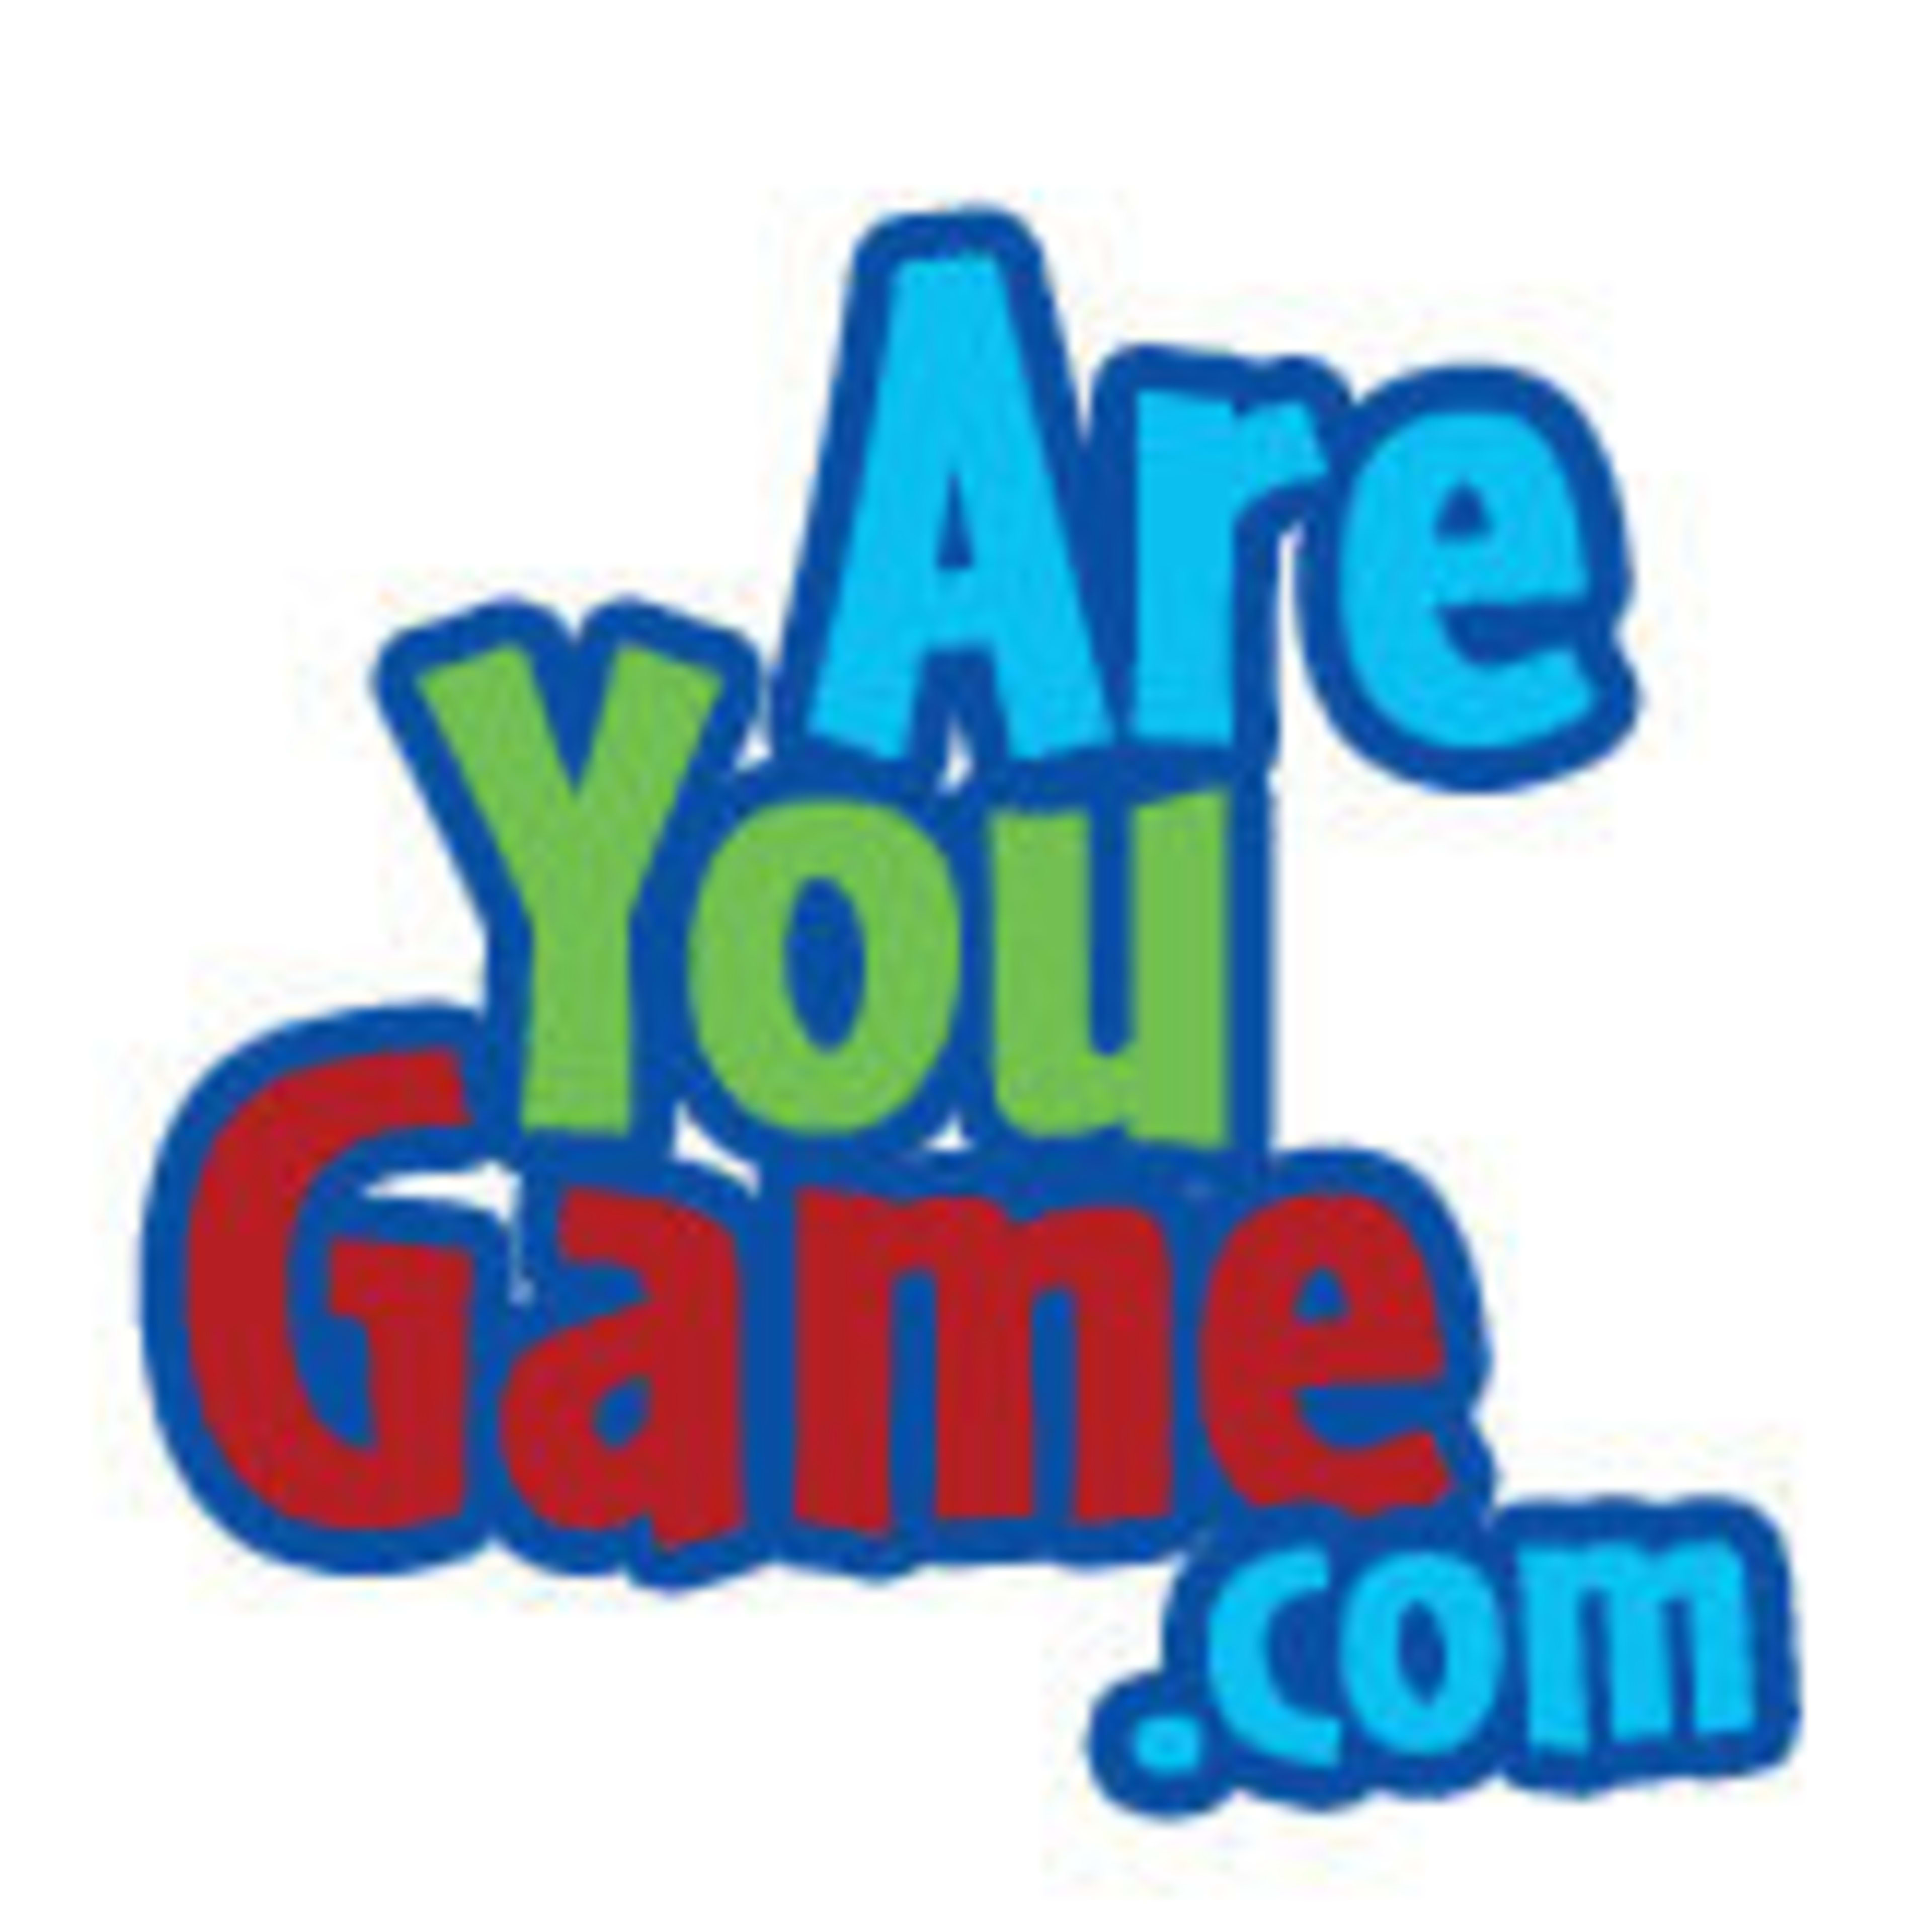 Are You GameCode